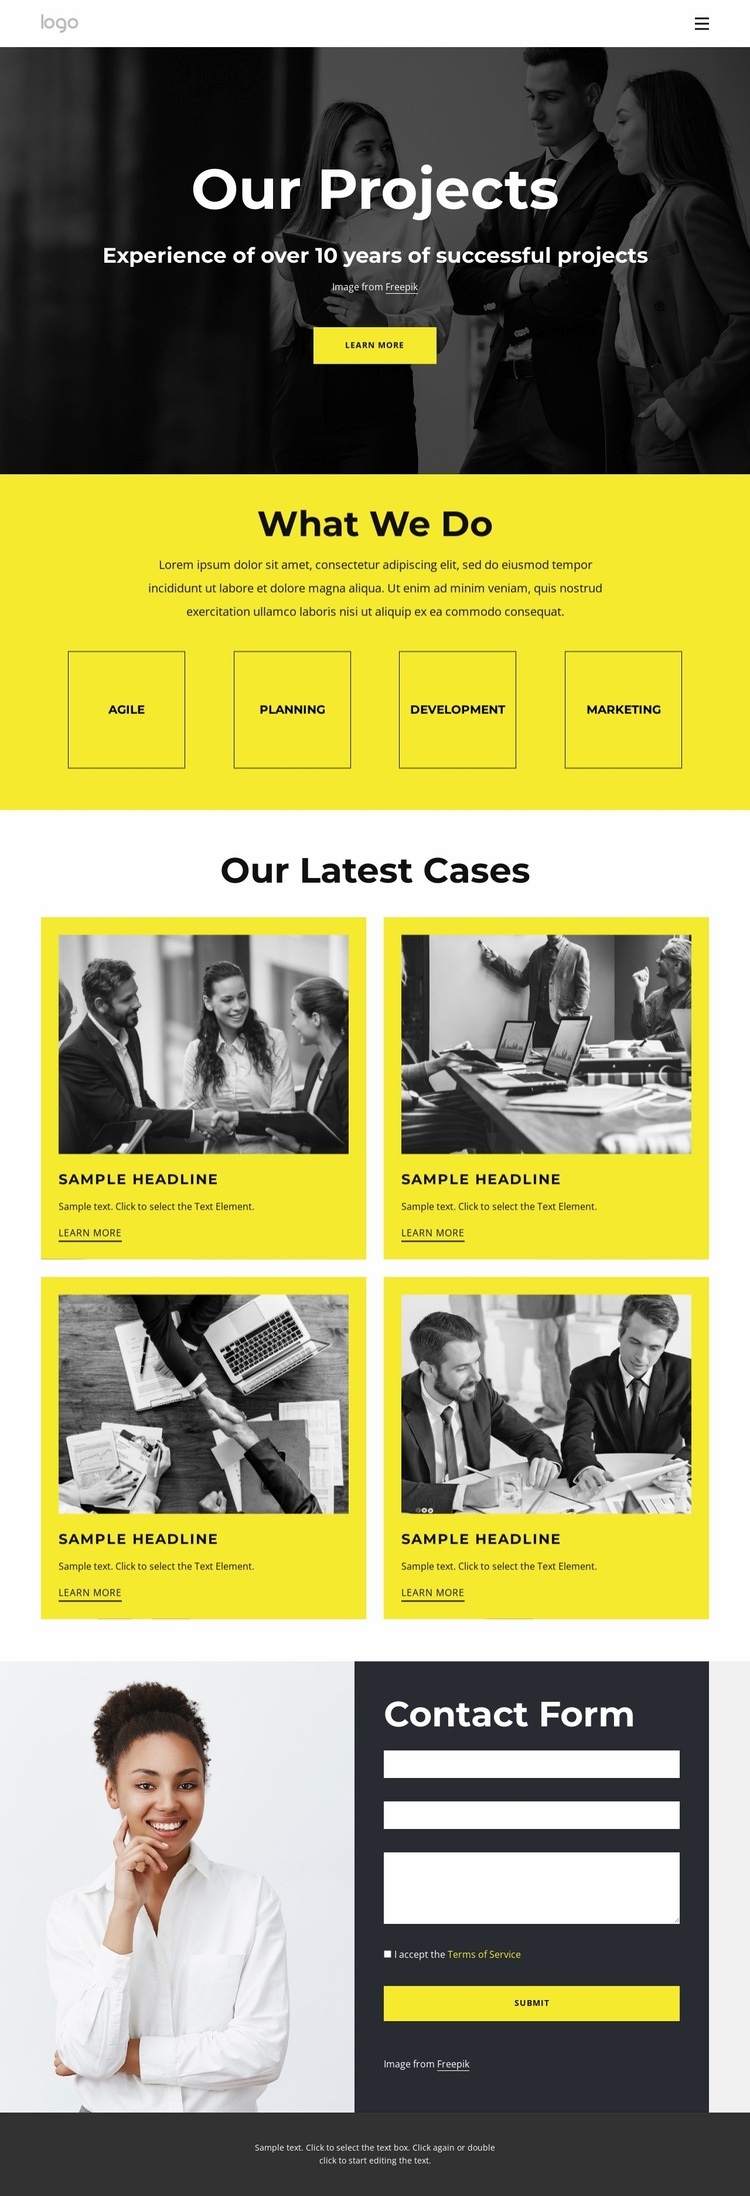 Our consulting success stories Homepage Design